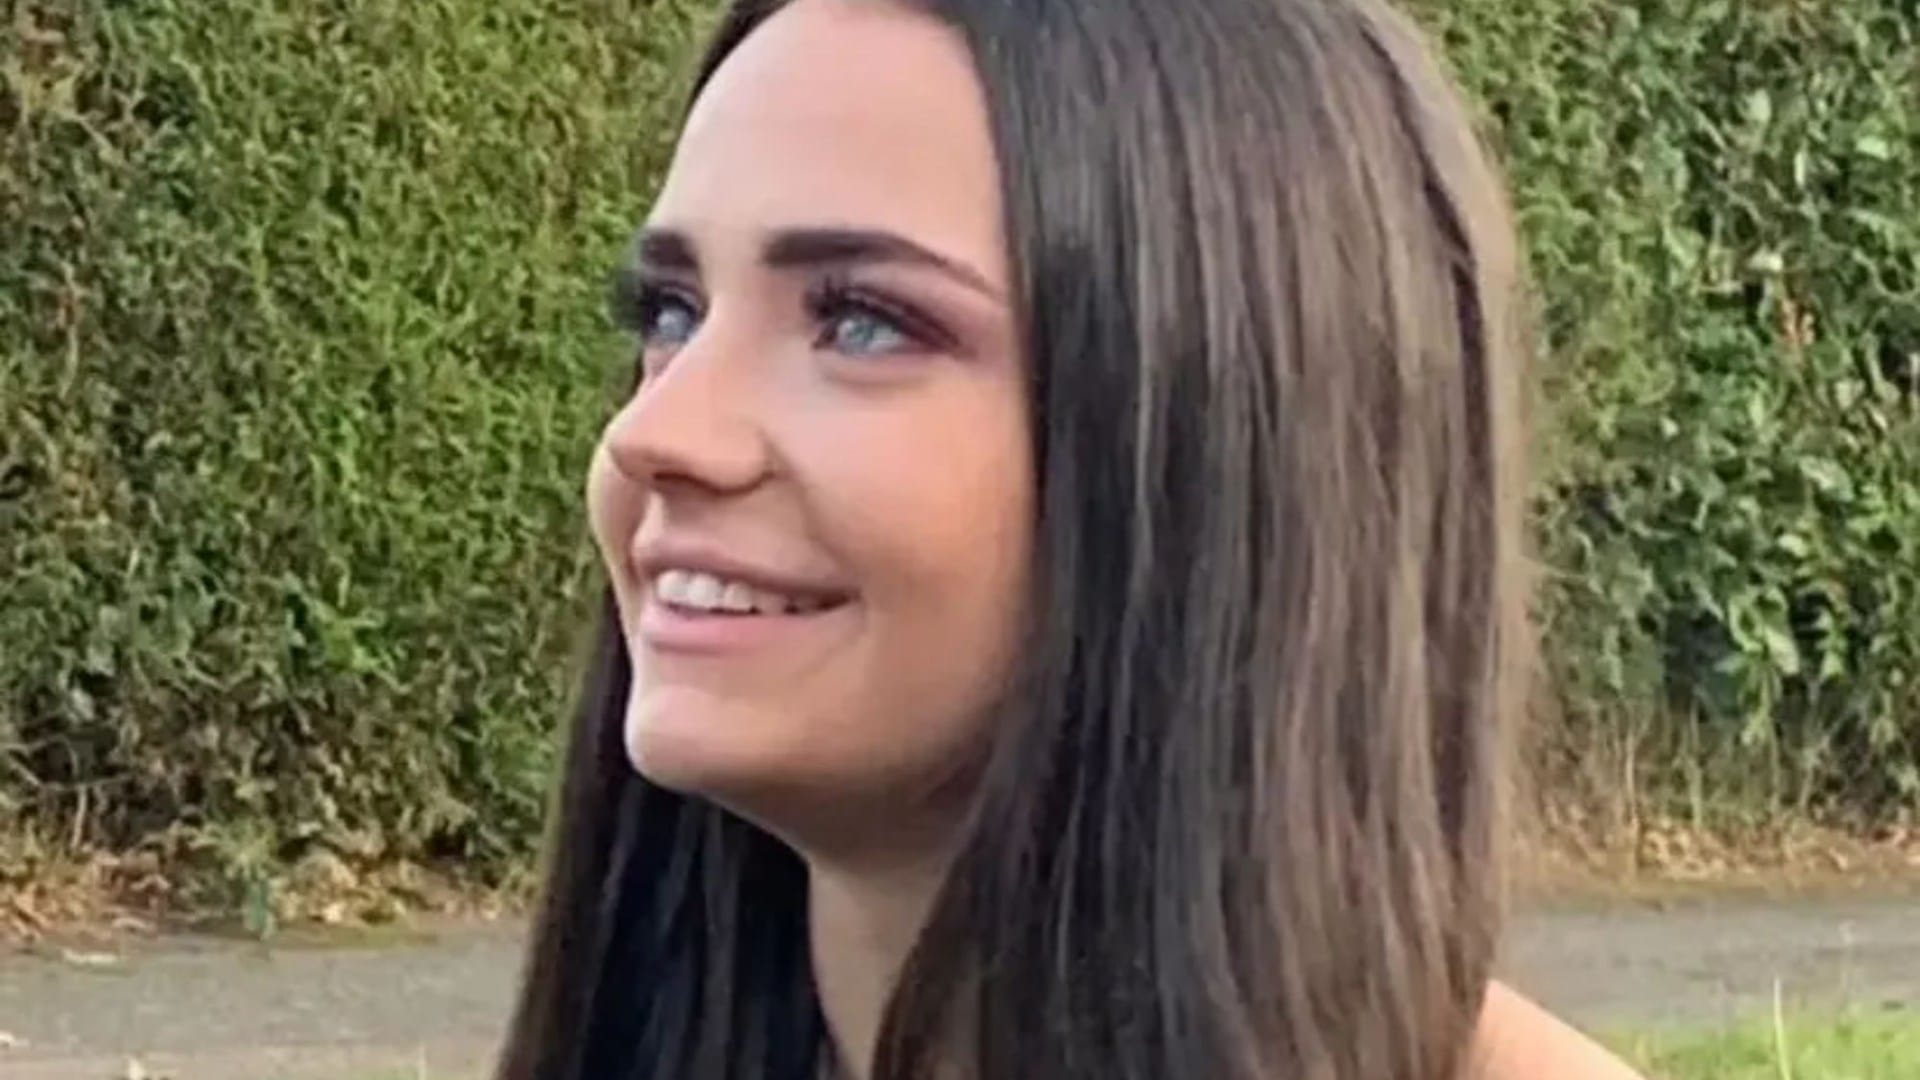 Heartbroken dad of ‘healthy’ teen who died after suffering ‘blurry vision’ reveals deepest regrets in warning to others